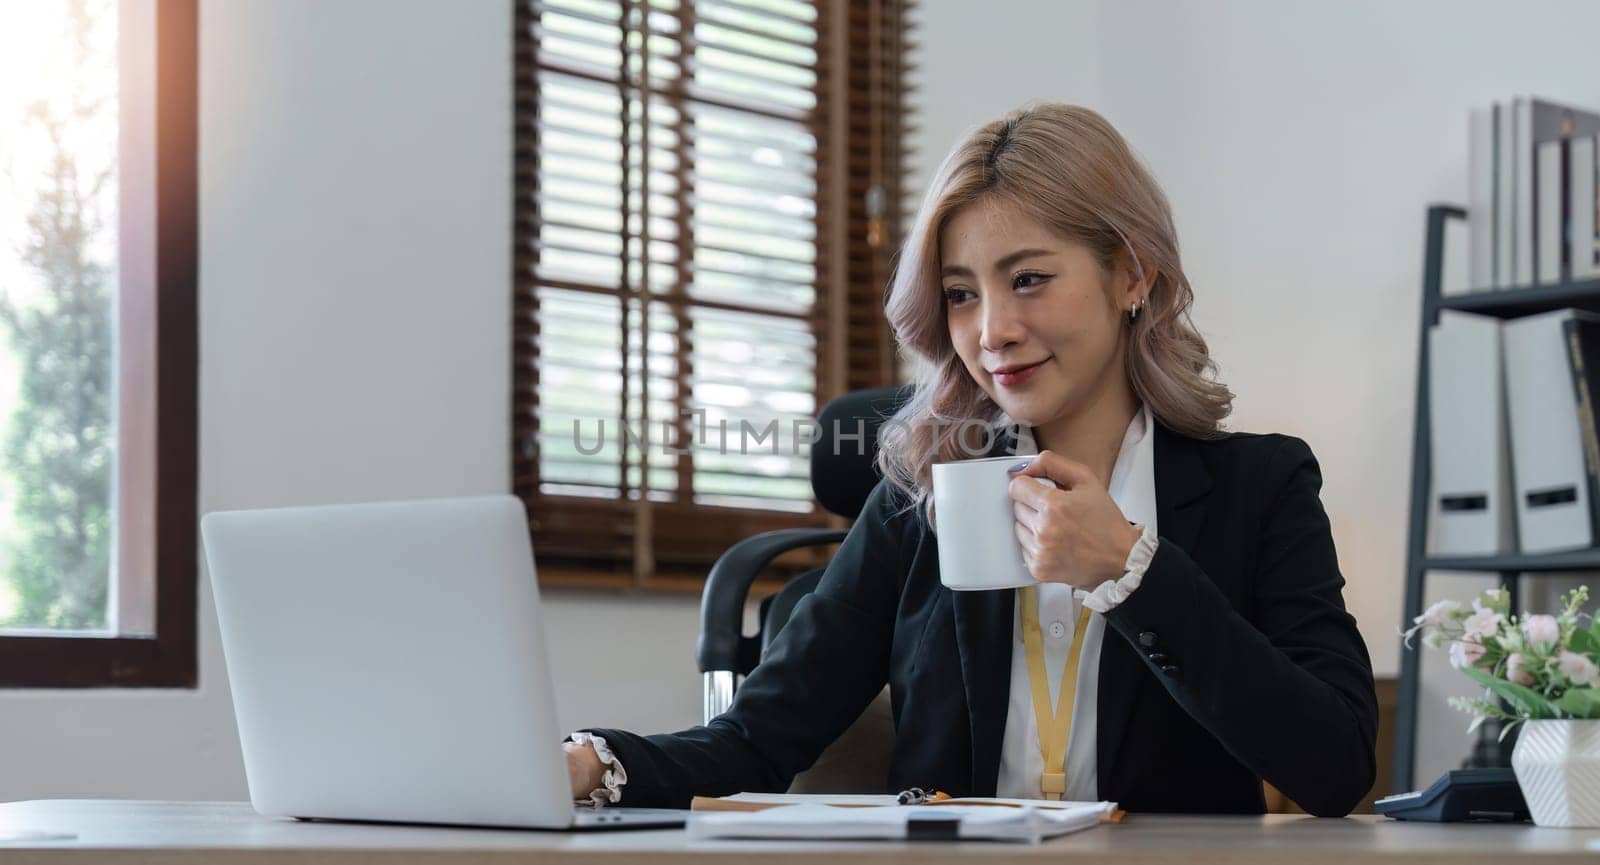 Asian woman business using a calculator calculating financial expense at home office.